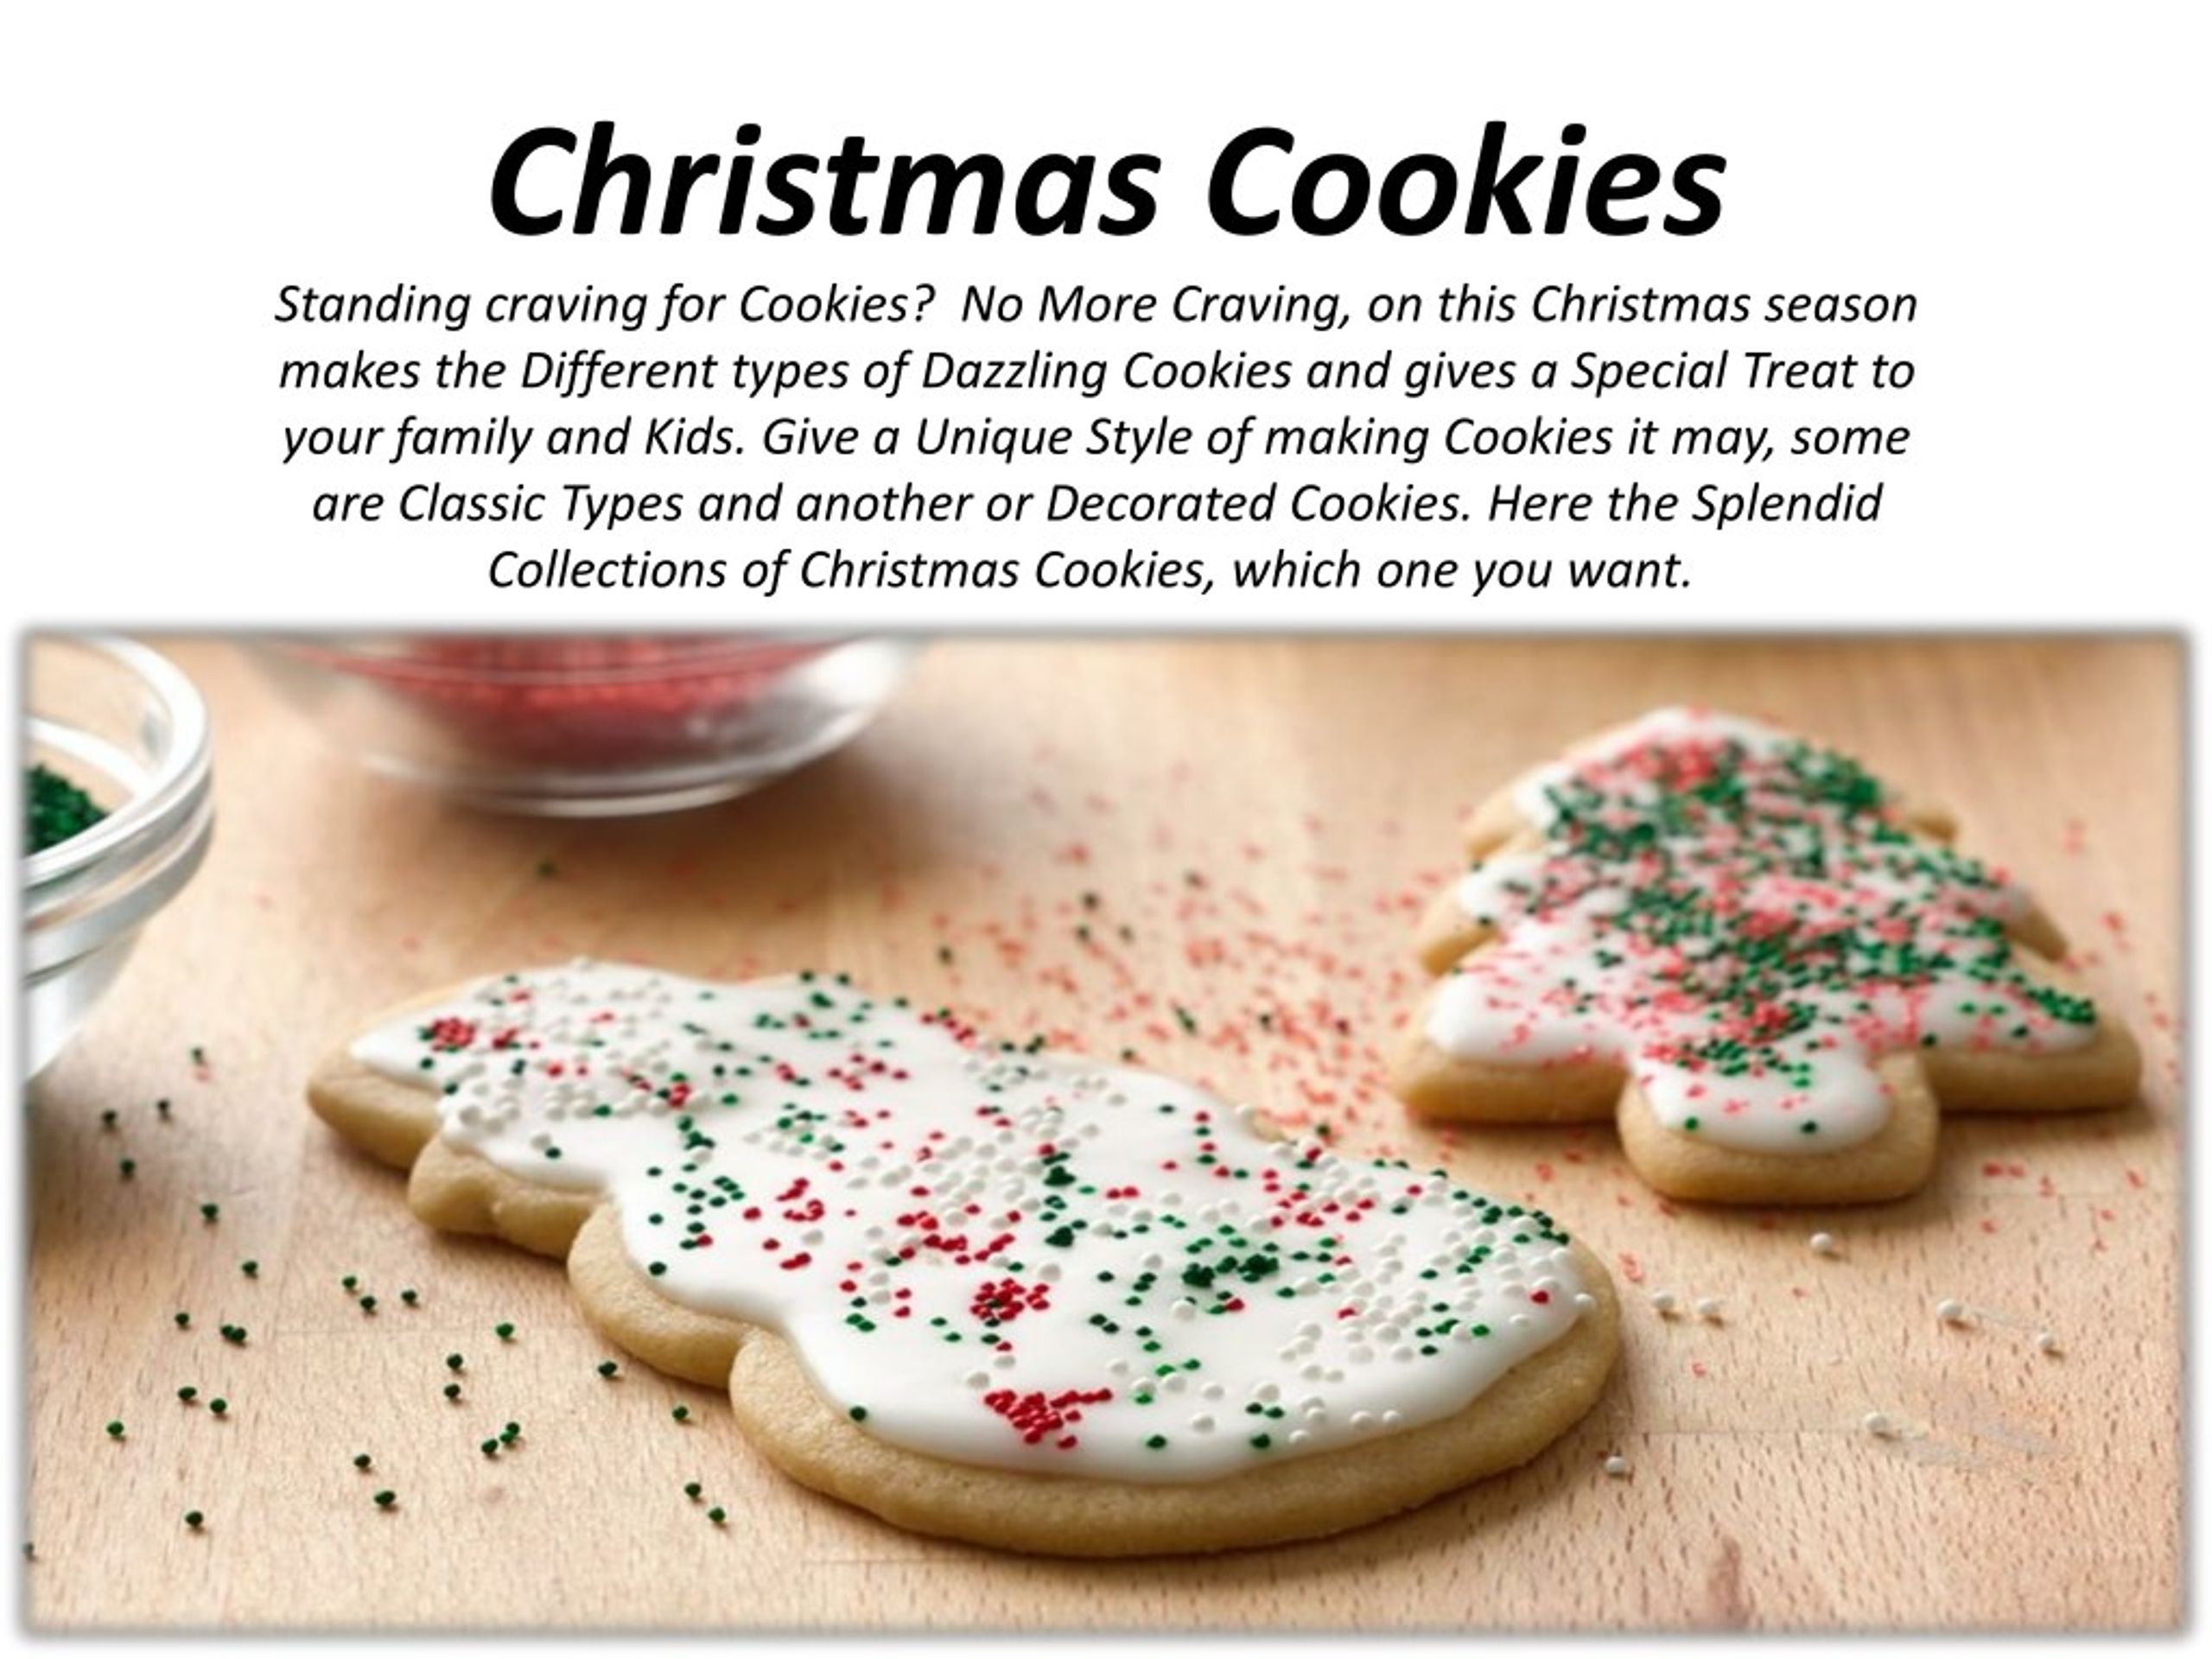 Ppt Christmas Cookies Powerpoint Presentation Free Download Id 7745901